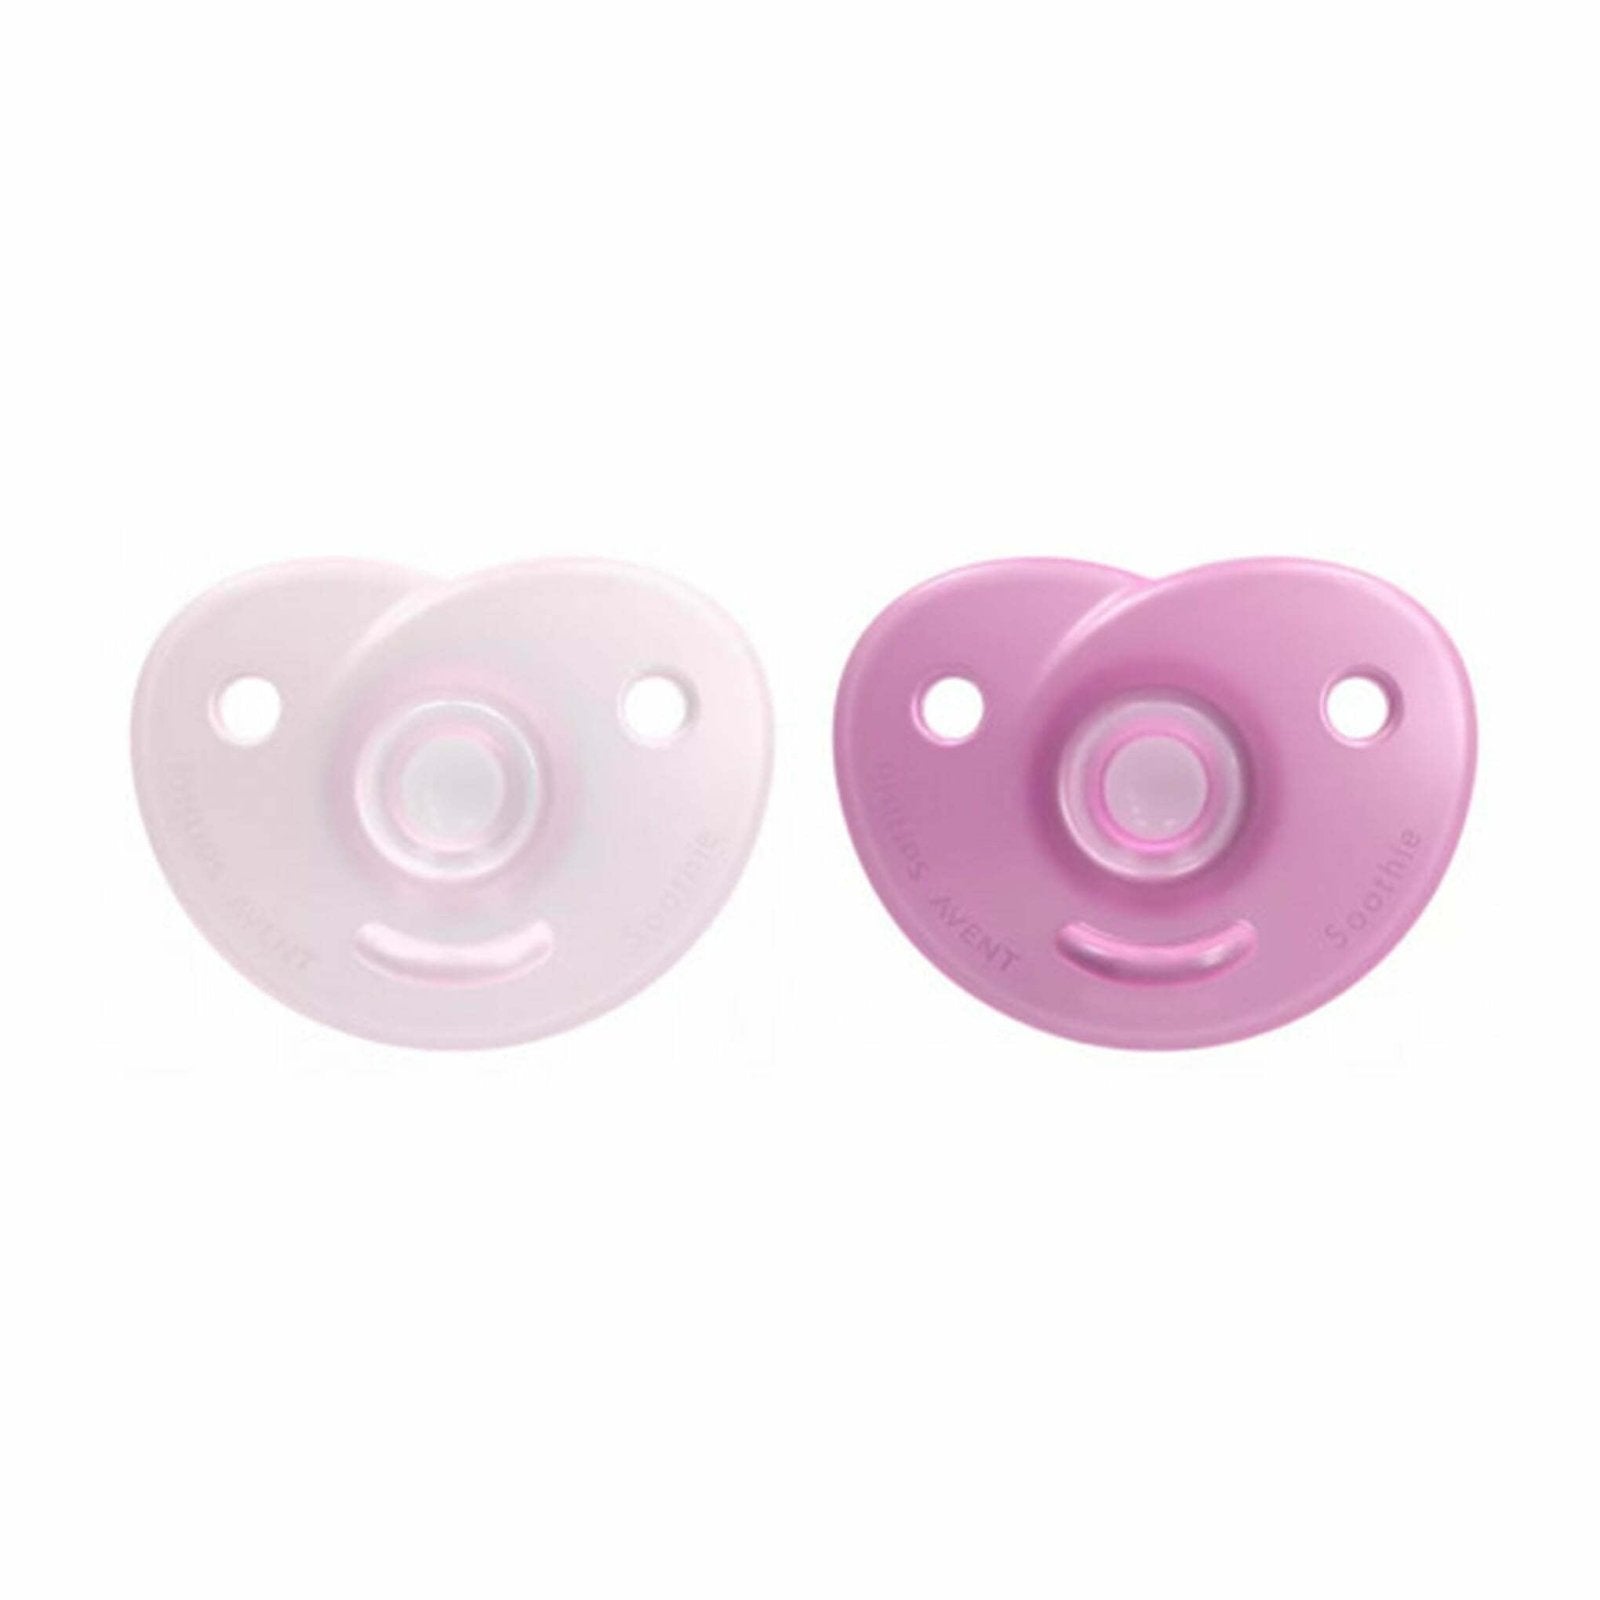 Soothie Heart Shape Soother 0-6M by Avent